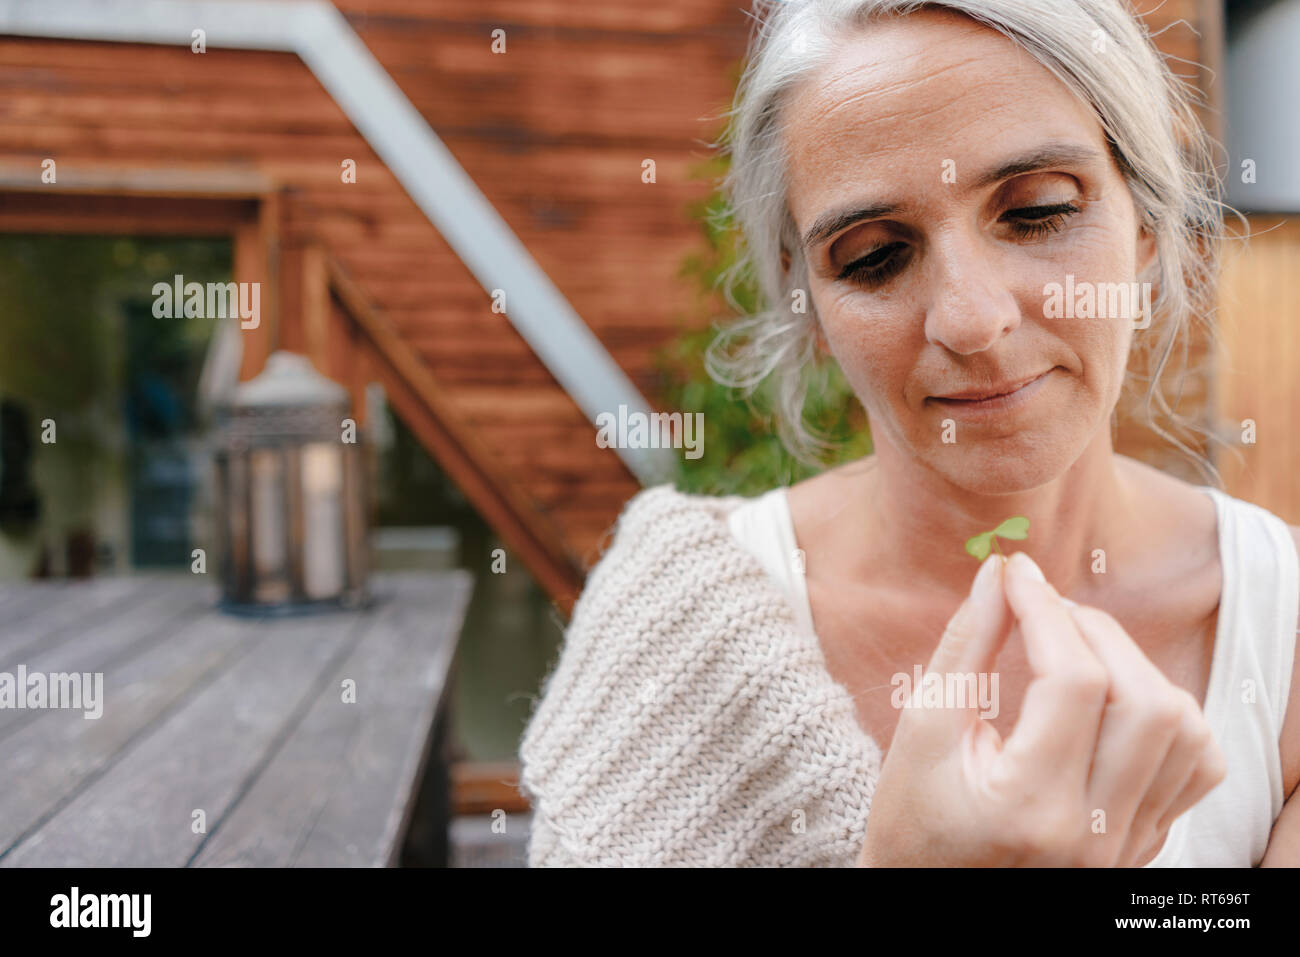 Portrait of woman looking at cloverleaf Stock Photo